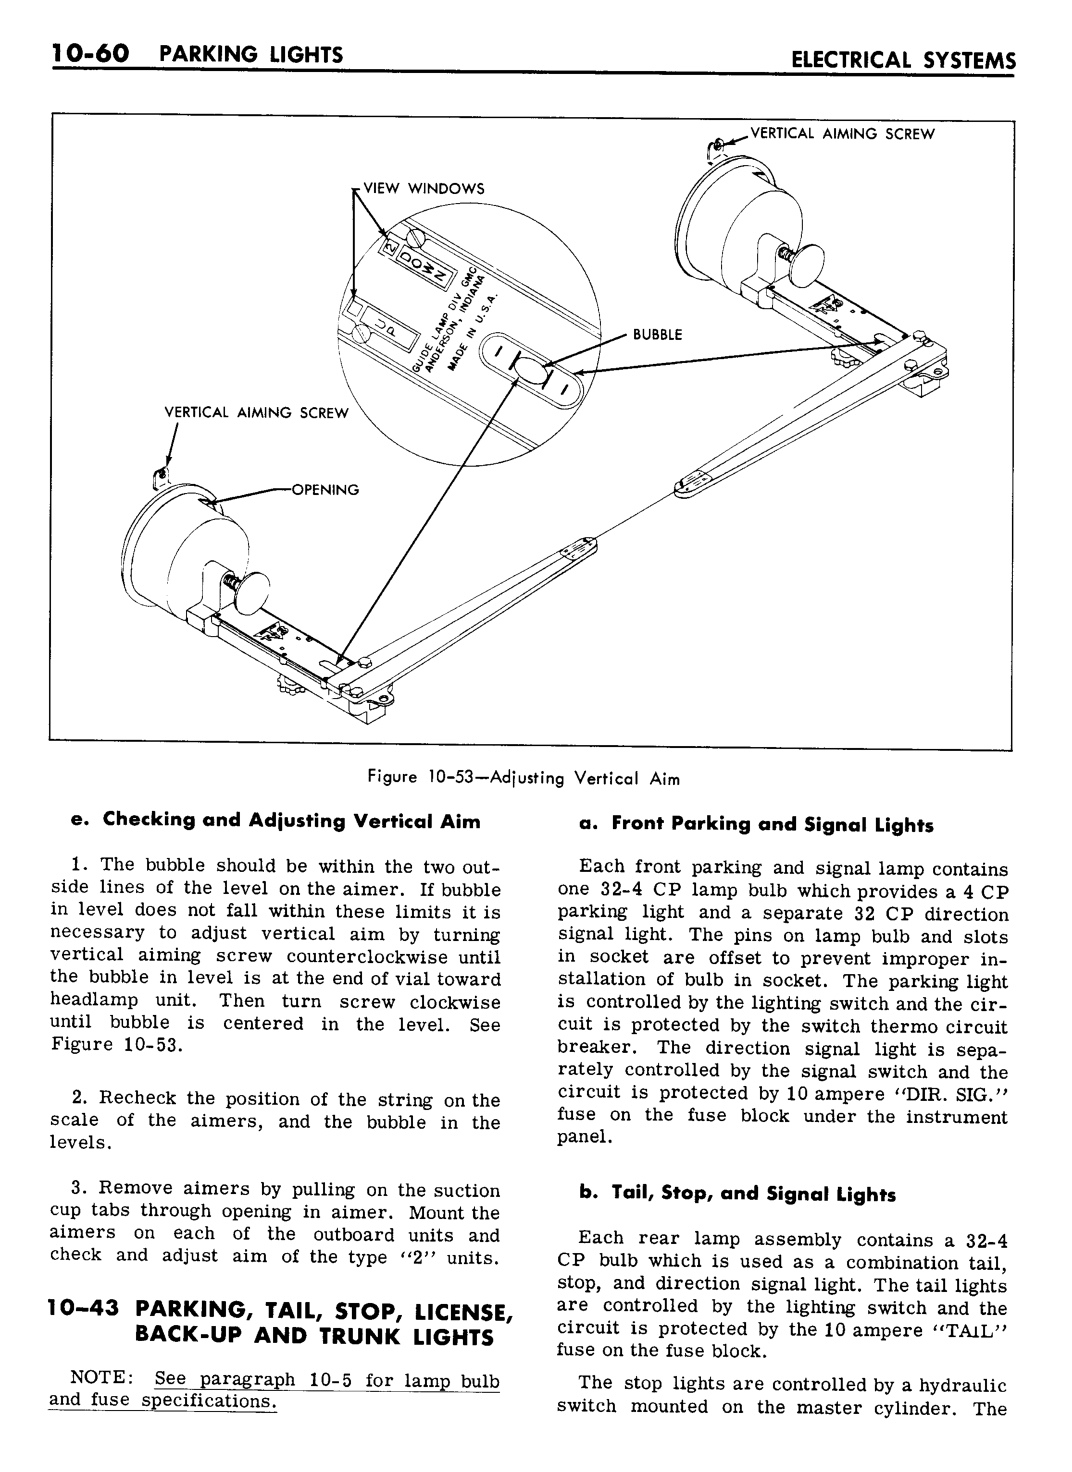 n_10 1961 Buick Shop Manual - Electrical Systems-060-060.jpg